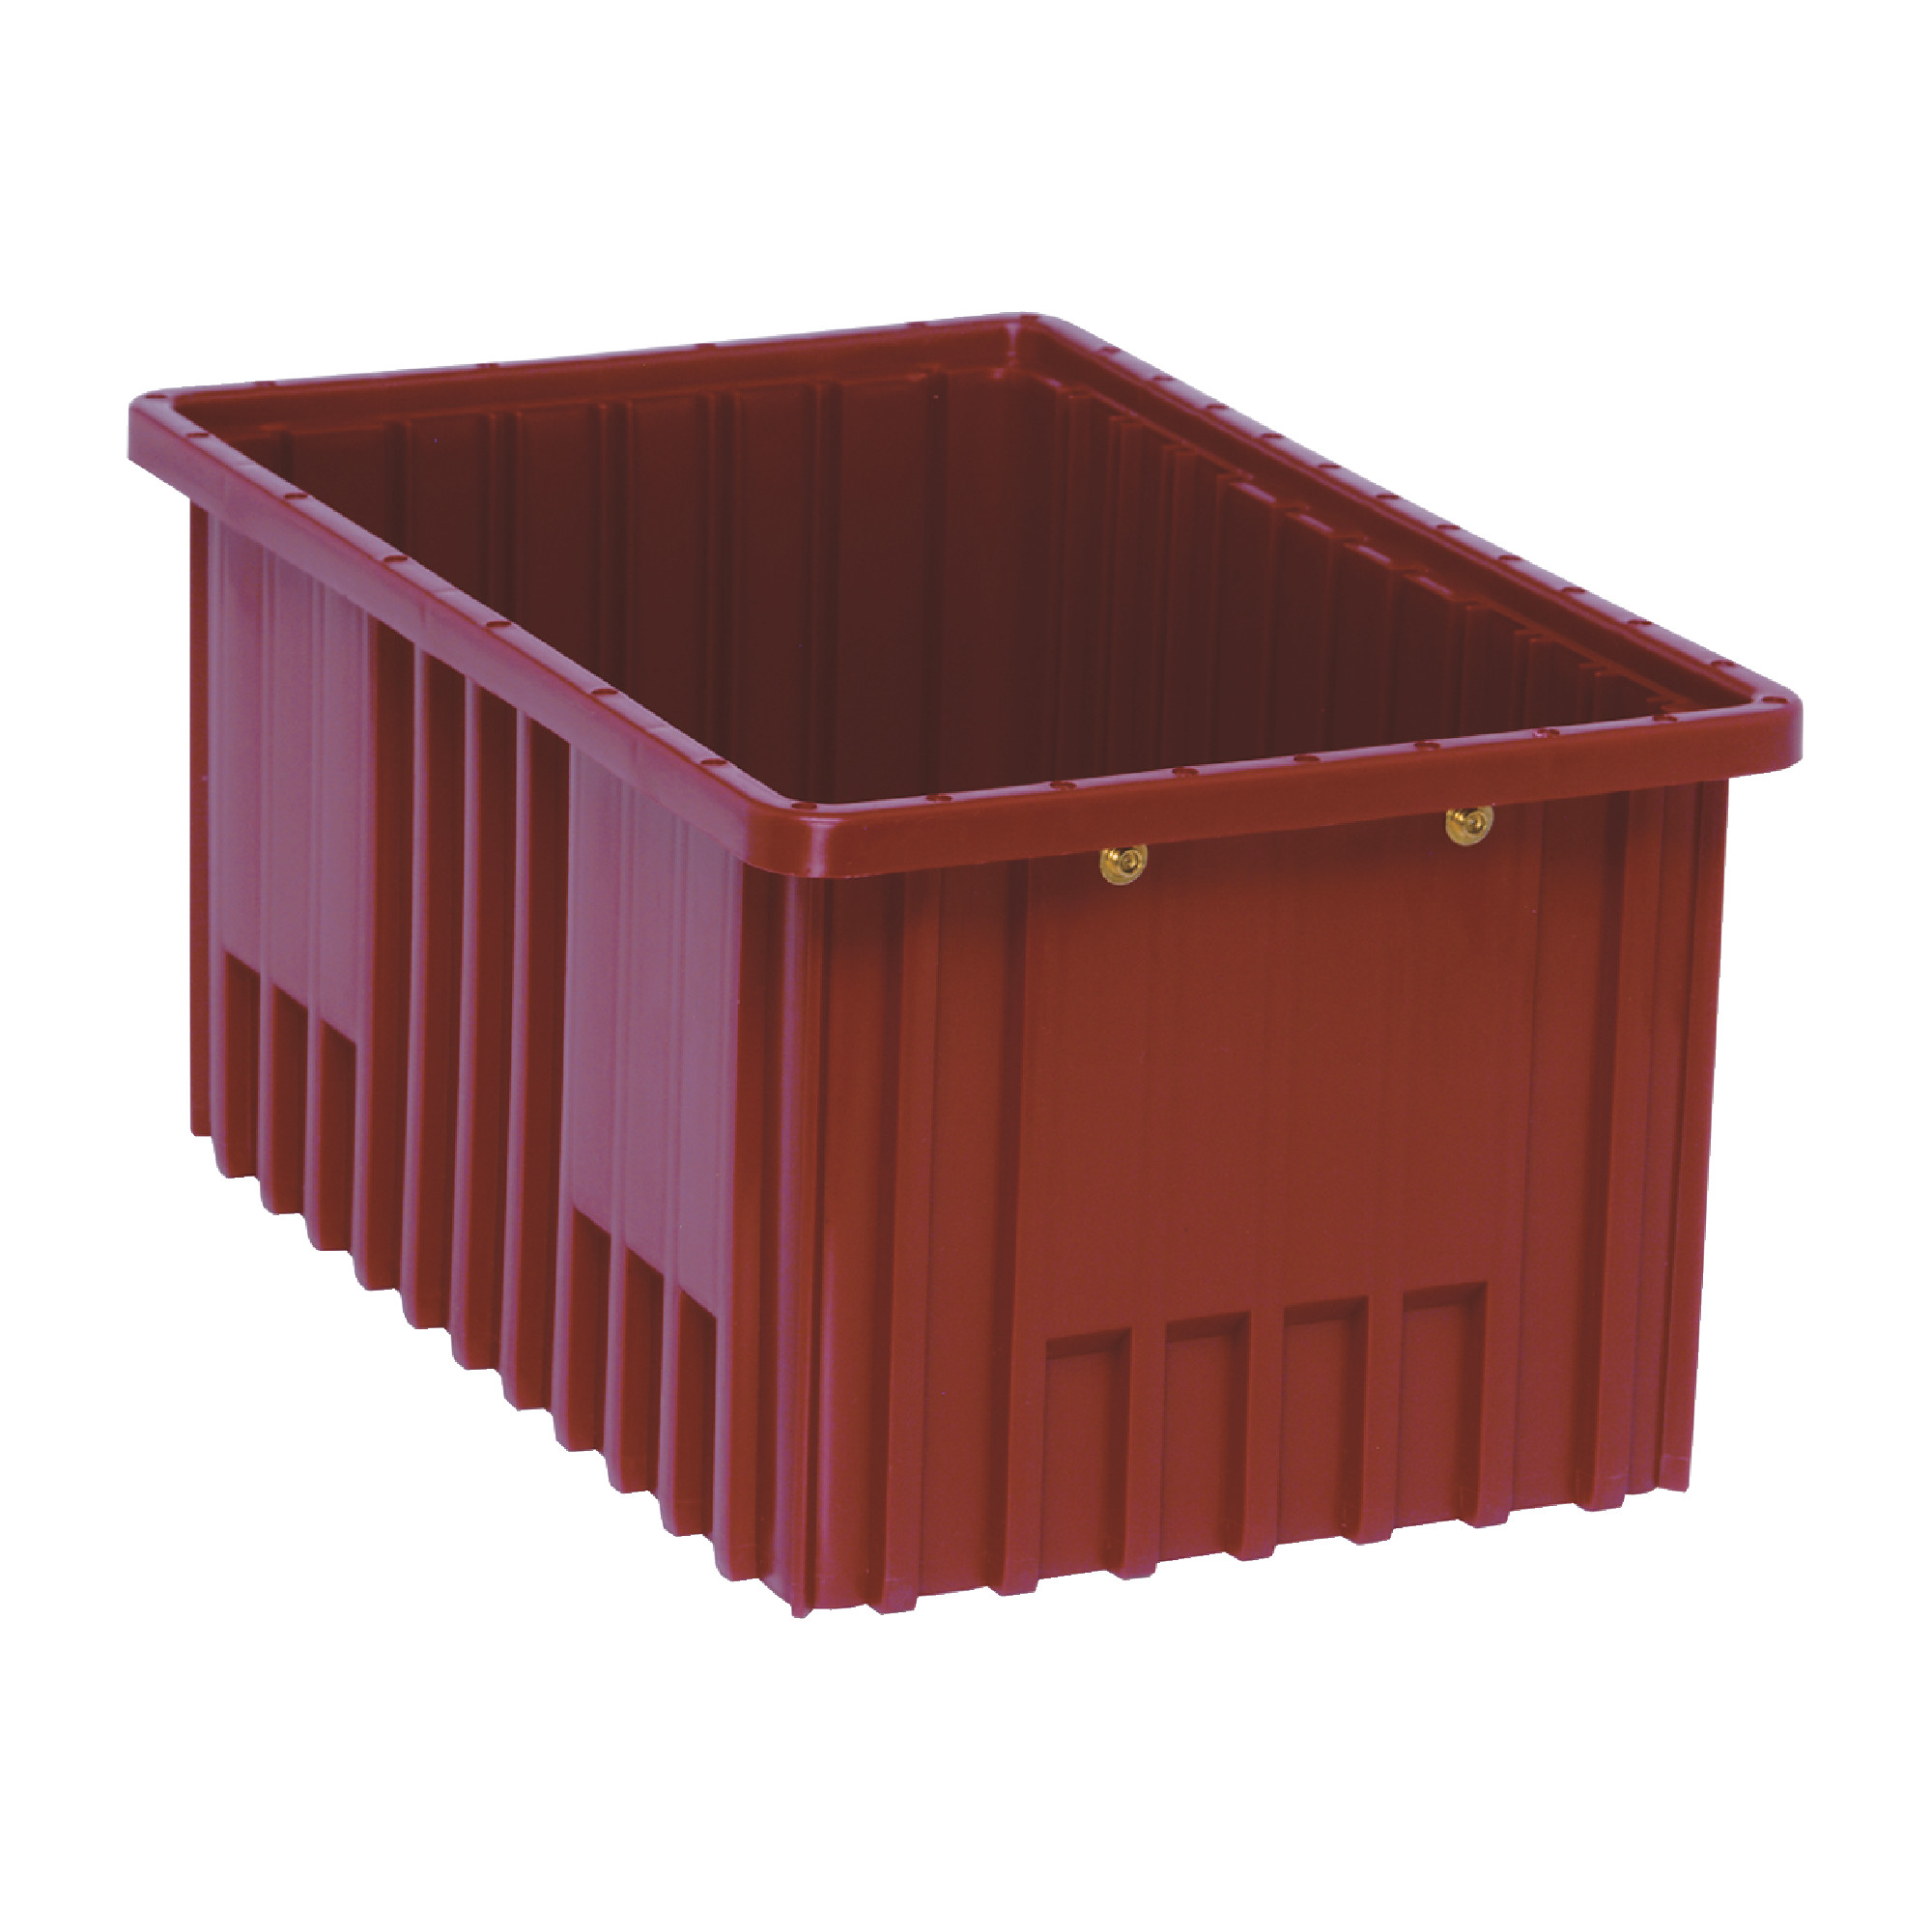 Bins For Dividable Grid Containers